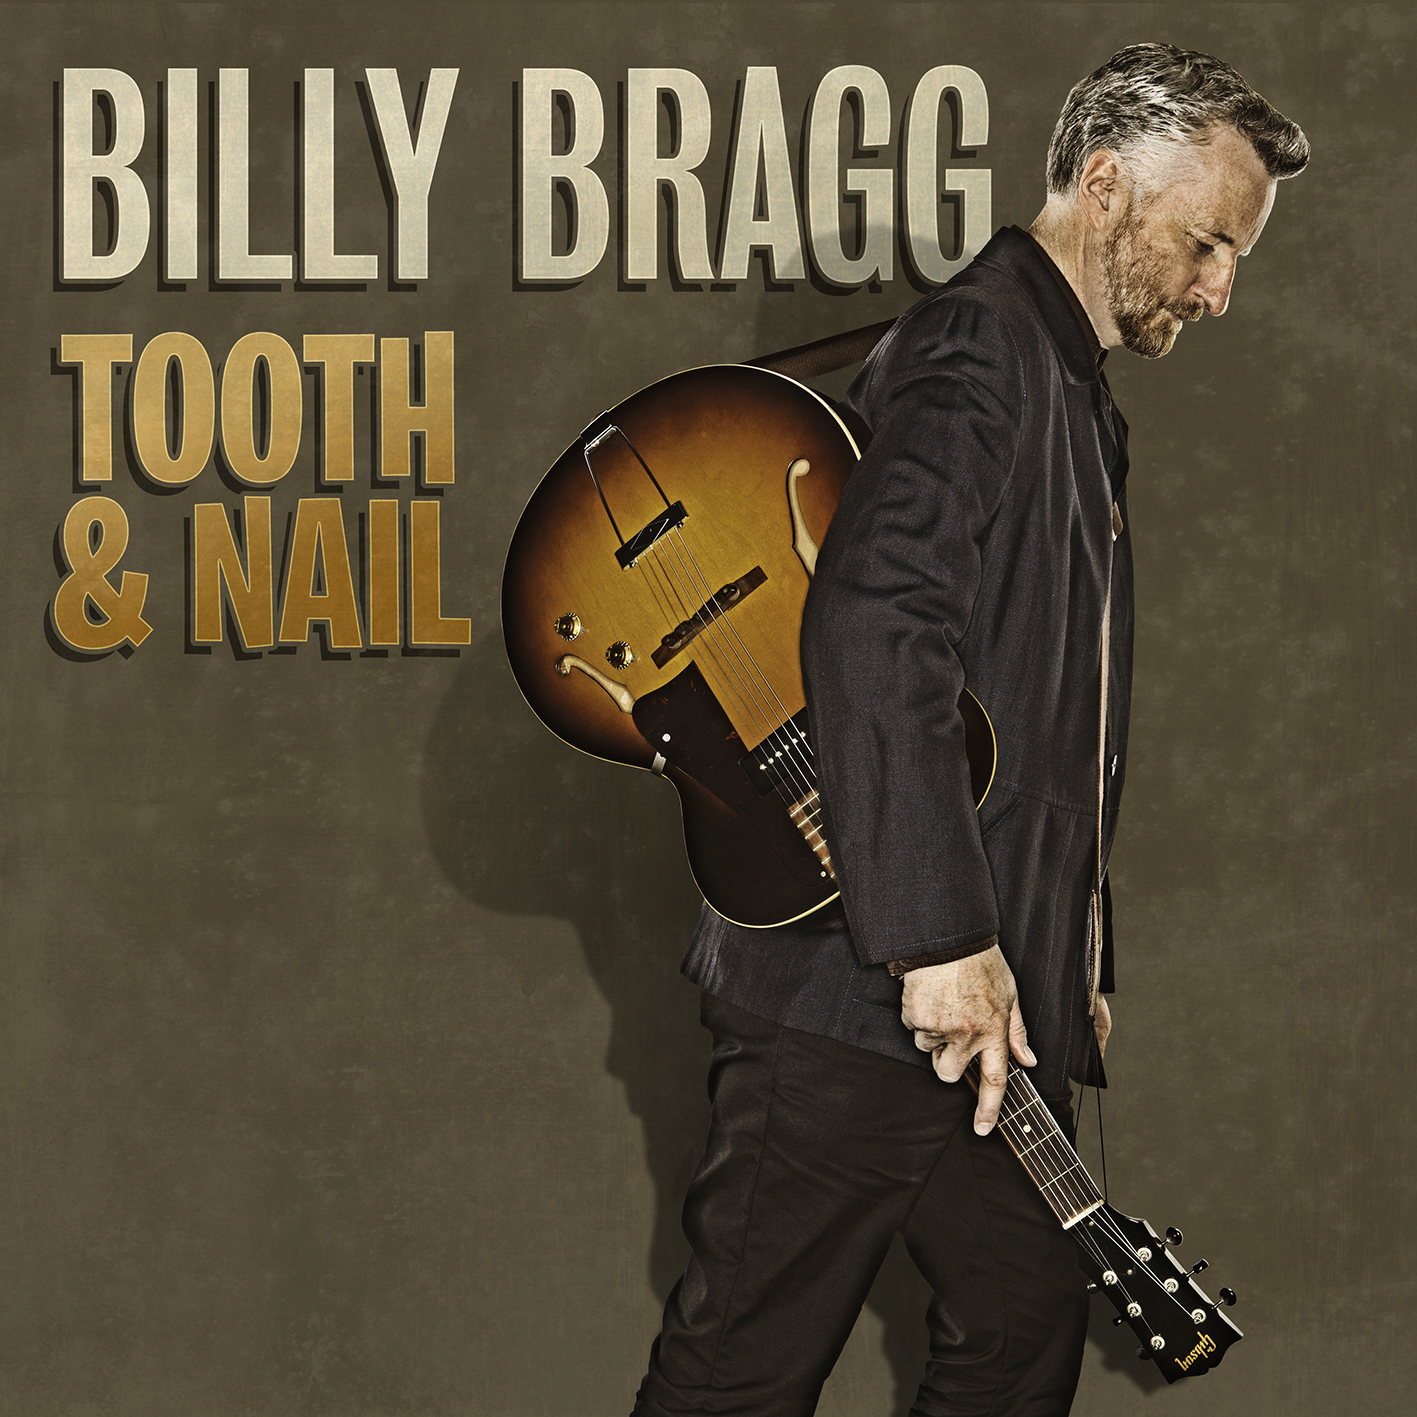 Billy Bragg - Tooth & Nail (Deluxe Edition Bookpa - CD+DVD